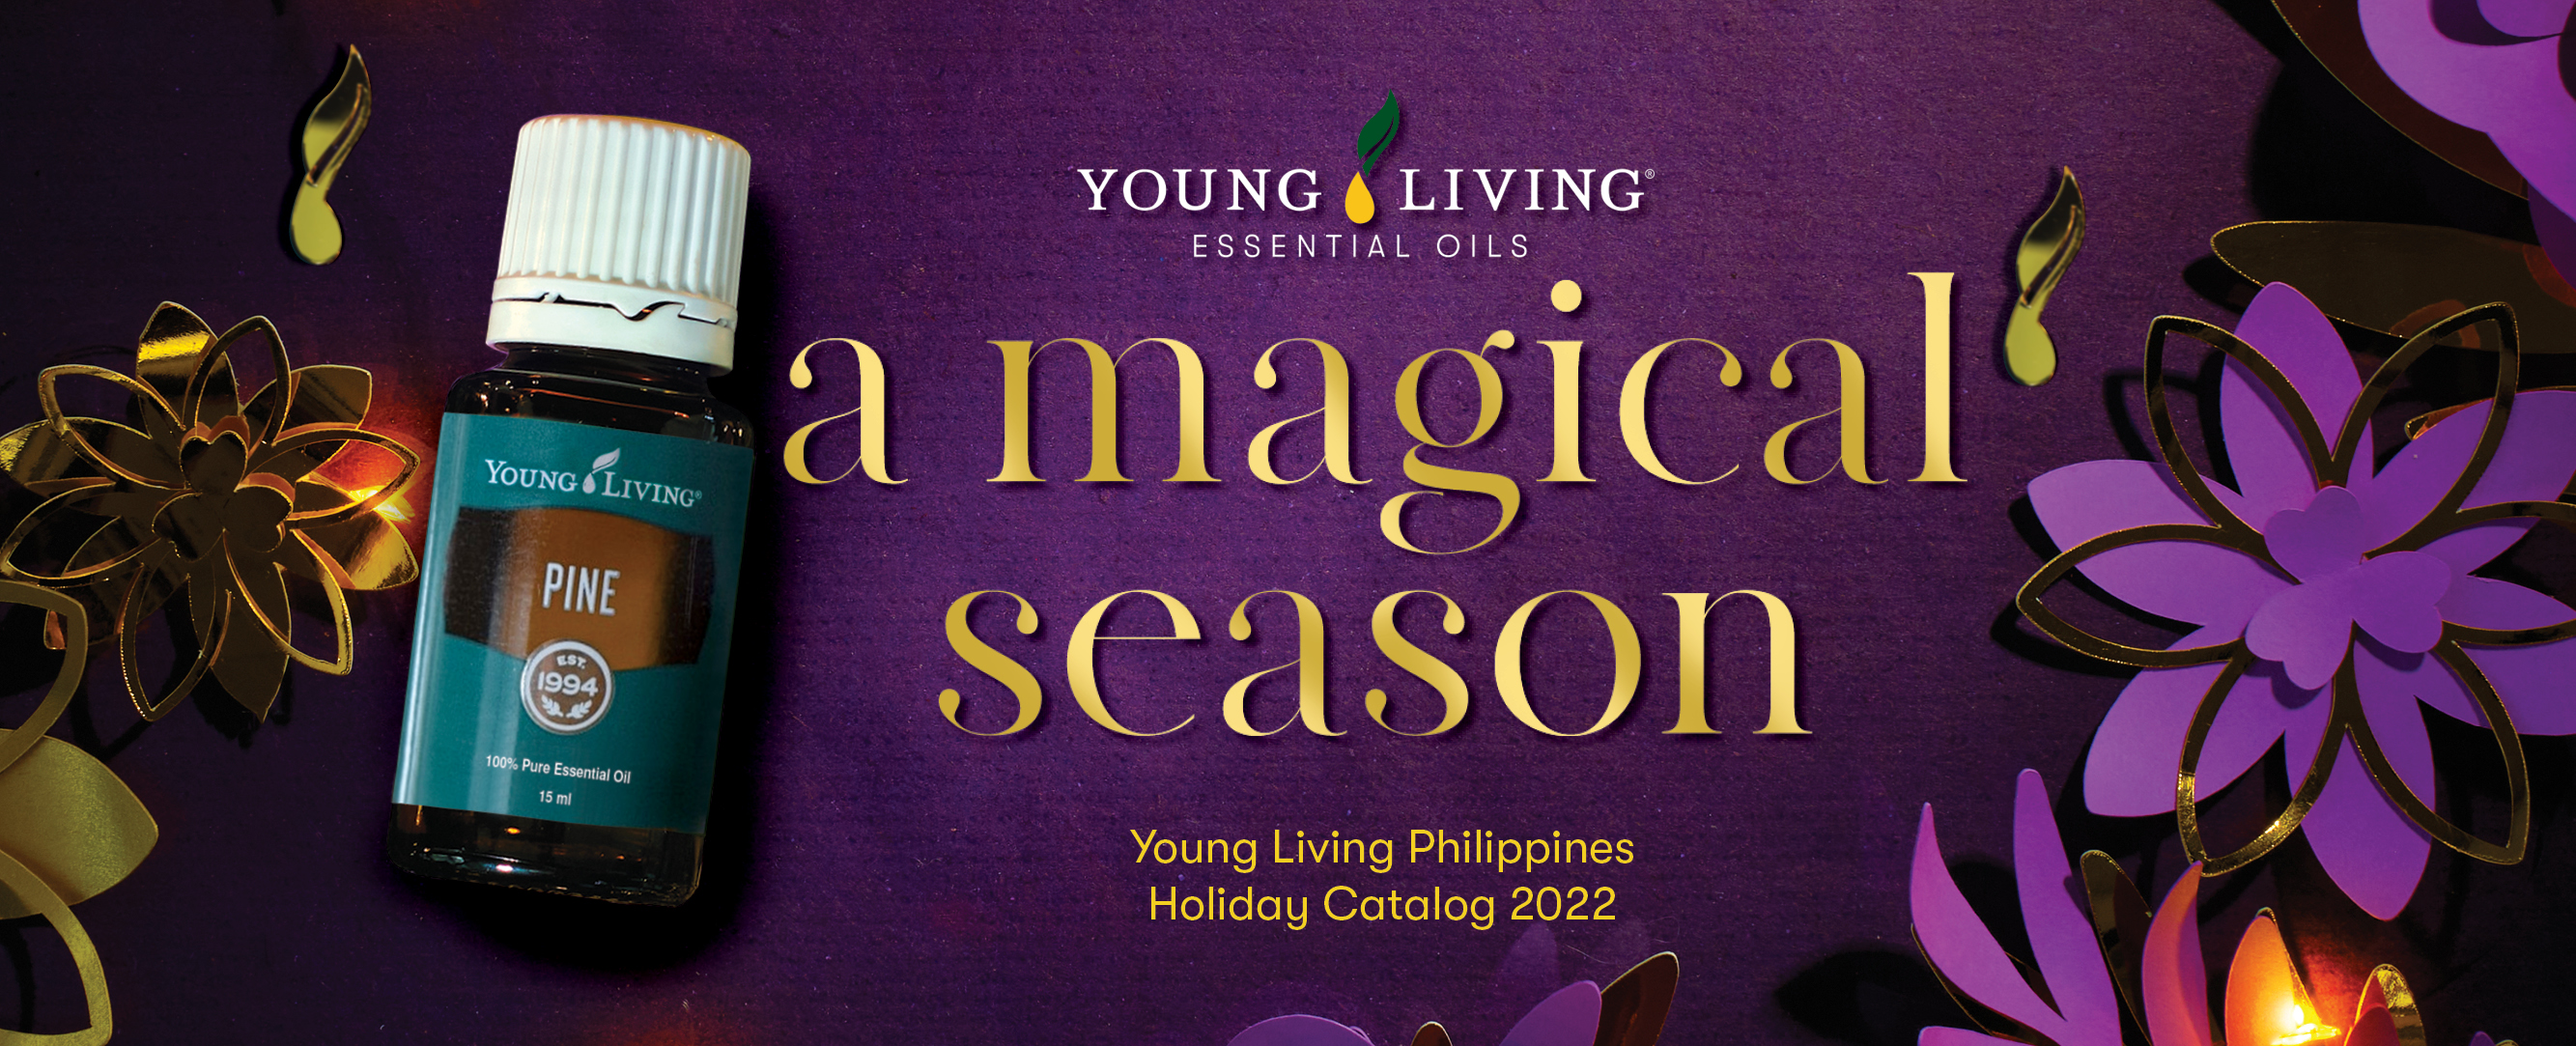 2022 Holiday Catalog  Young Living Essential Oils